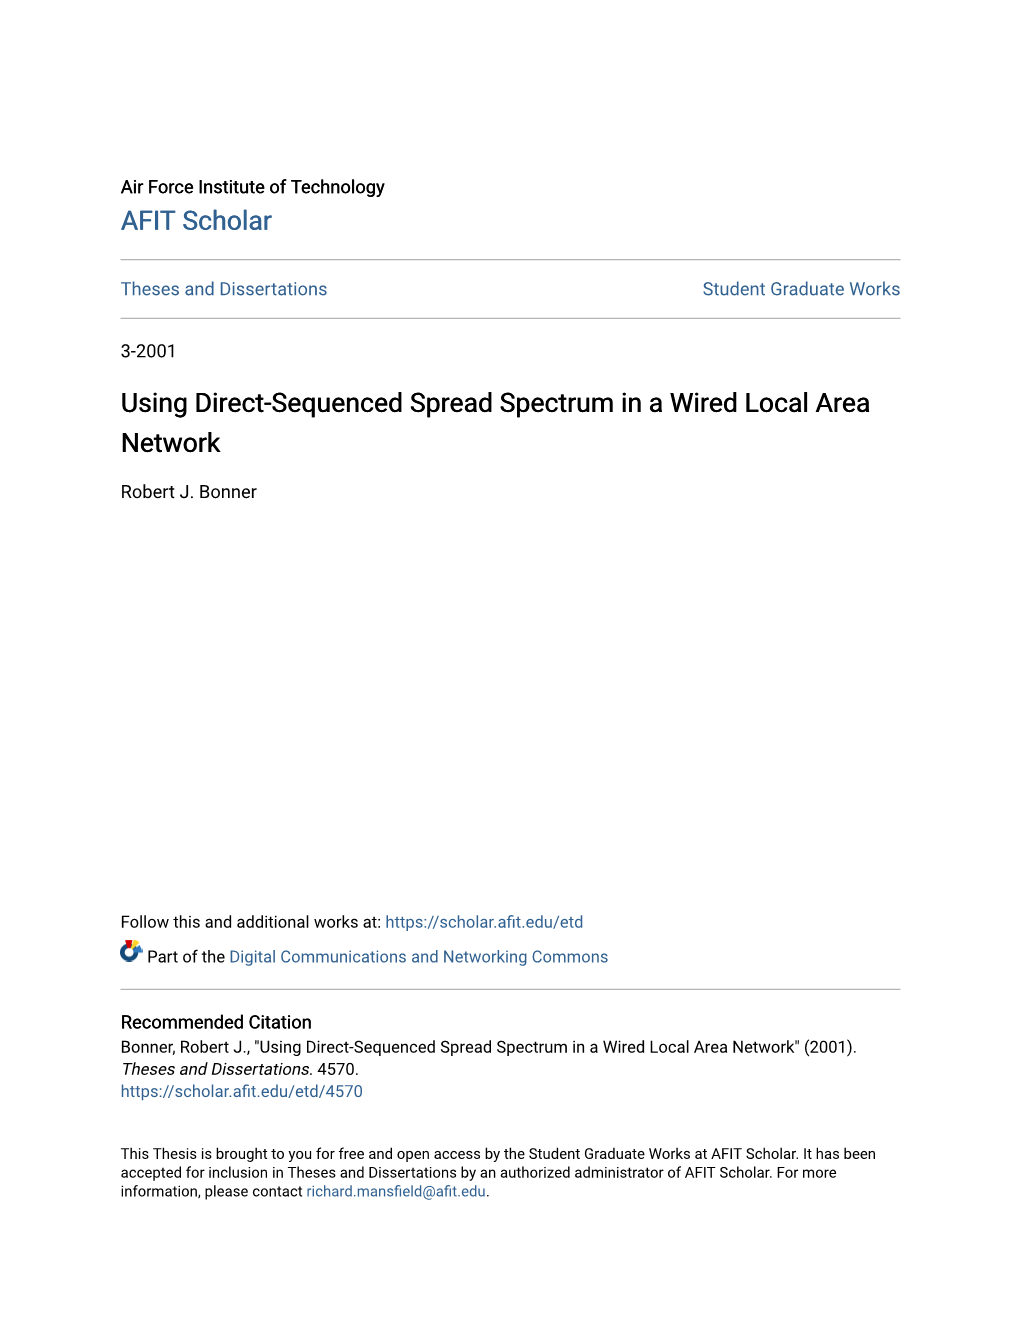 Using Direct-Sequenced Spread Spectrum in a Wired Local Area Network